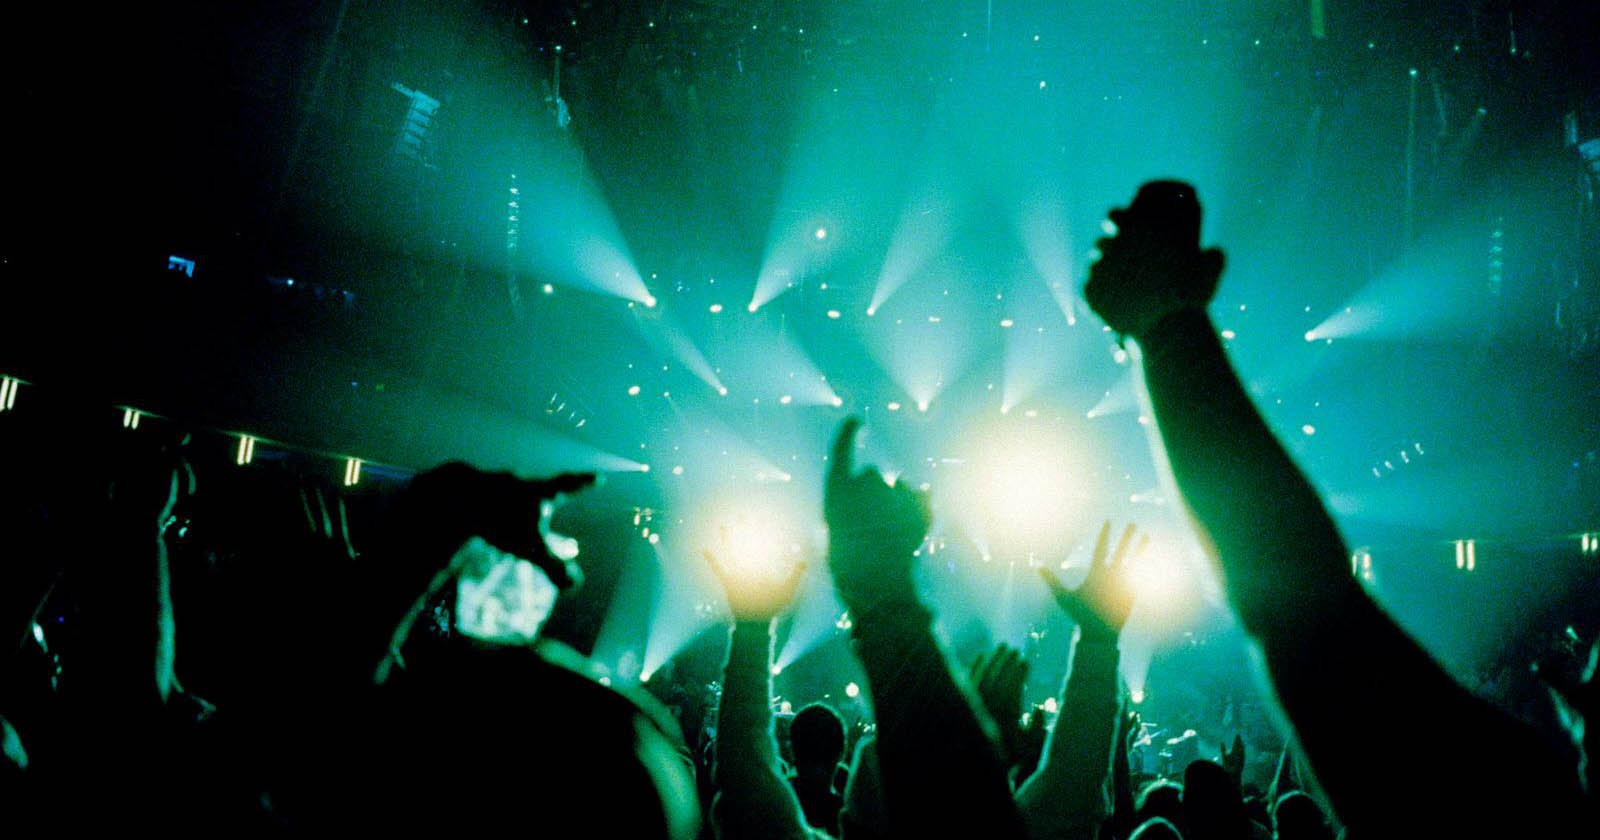 How to Shoot Film Photos at Concerts